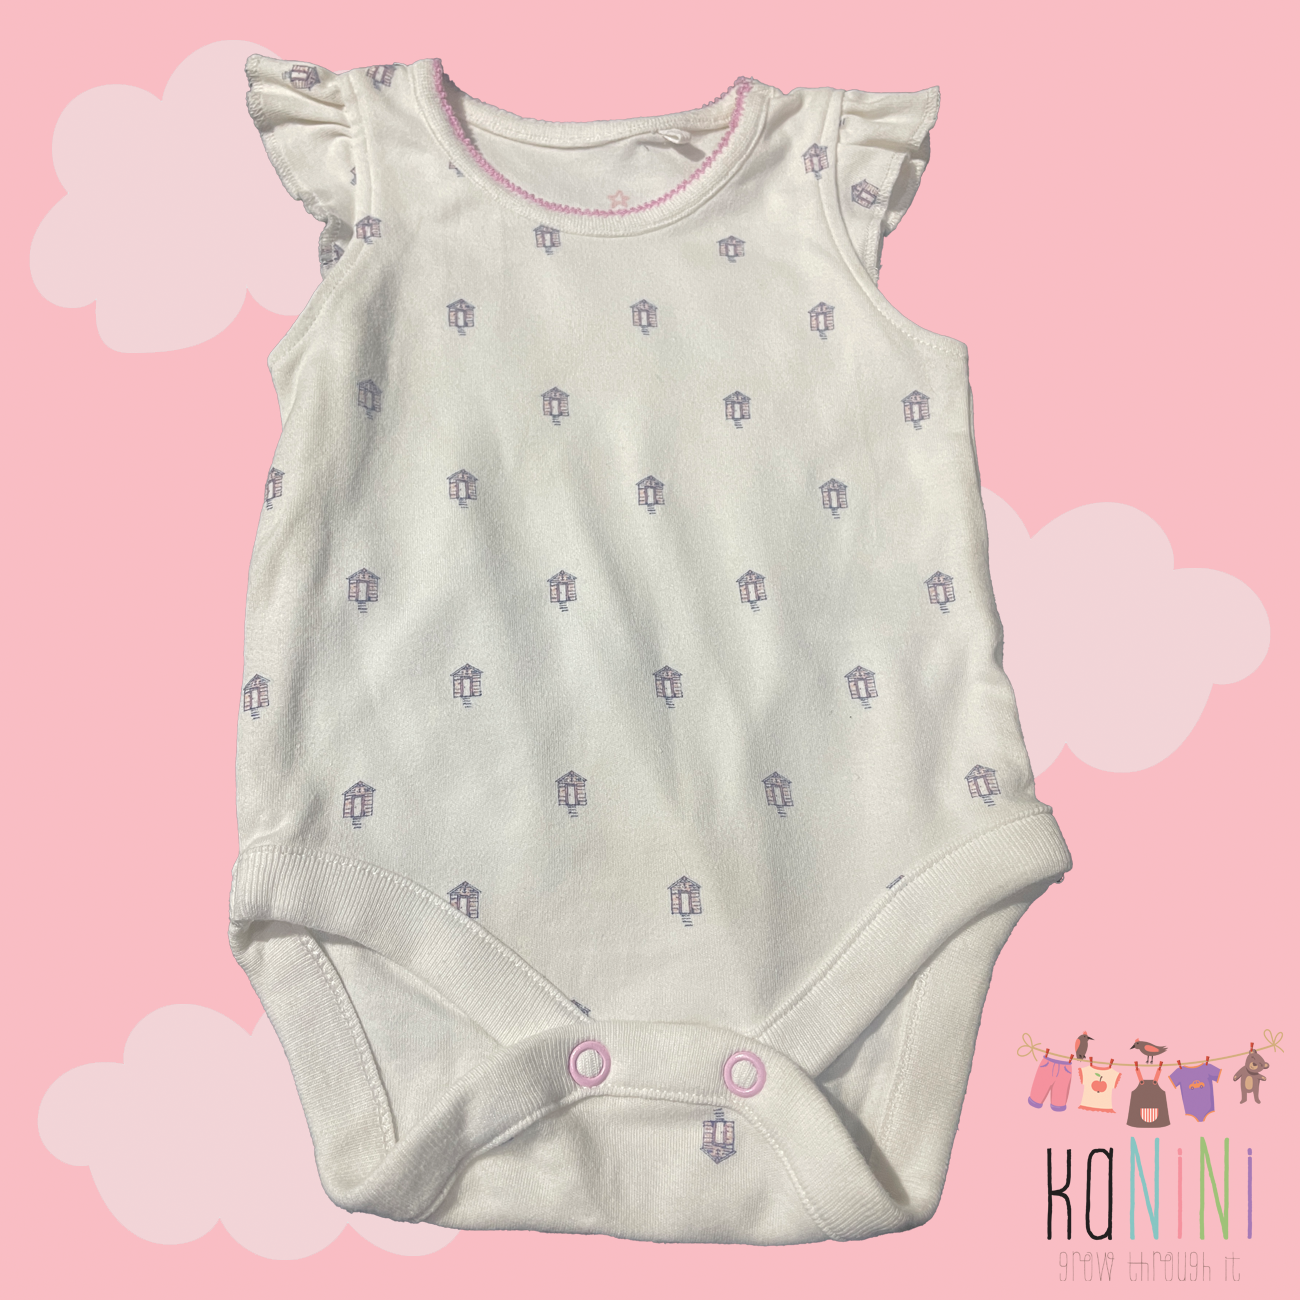 Featured image for “UK Next 0 - 3 Months Girls House Print Romper”